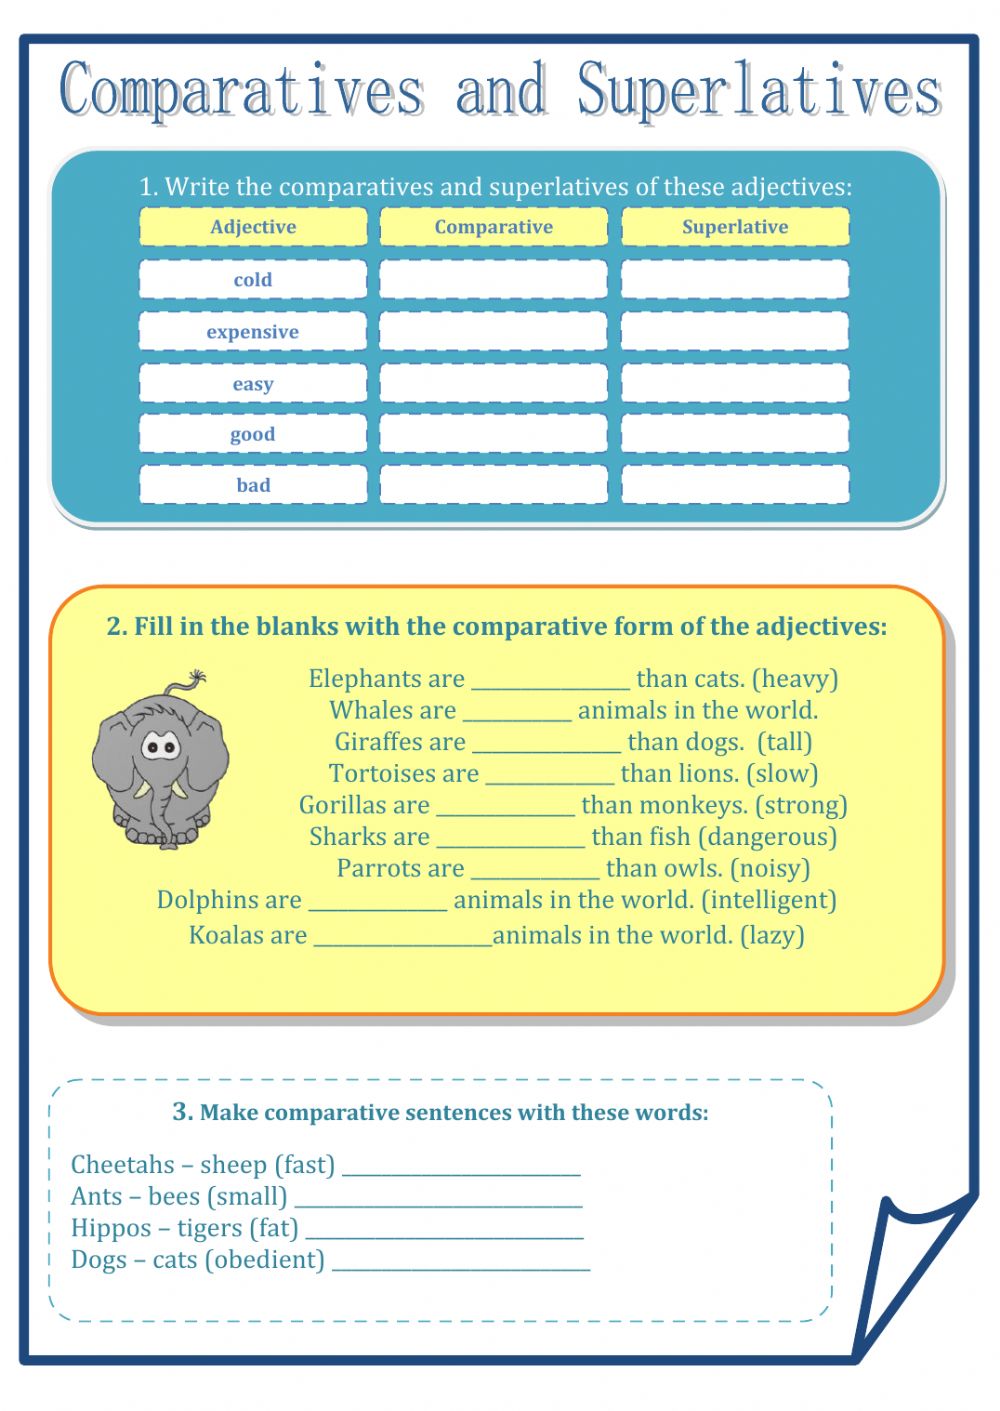 Comparatives And Superlatives Of Adjectives And Adverbs Worksheets